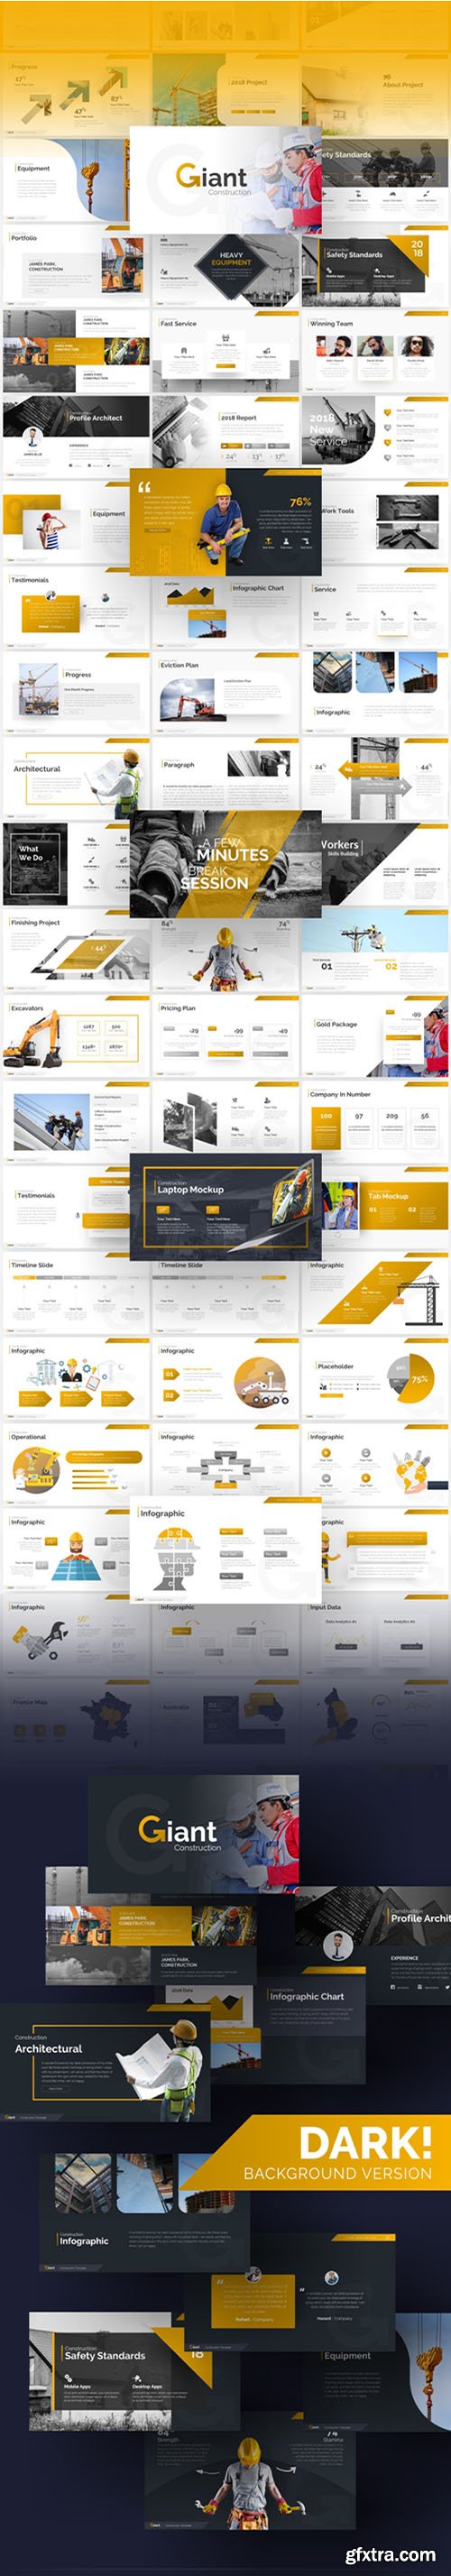 Giant Construction PowerPoint Presentation Template 21771651